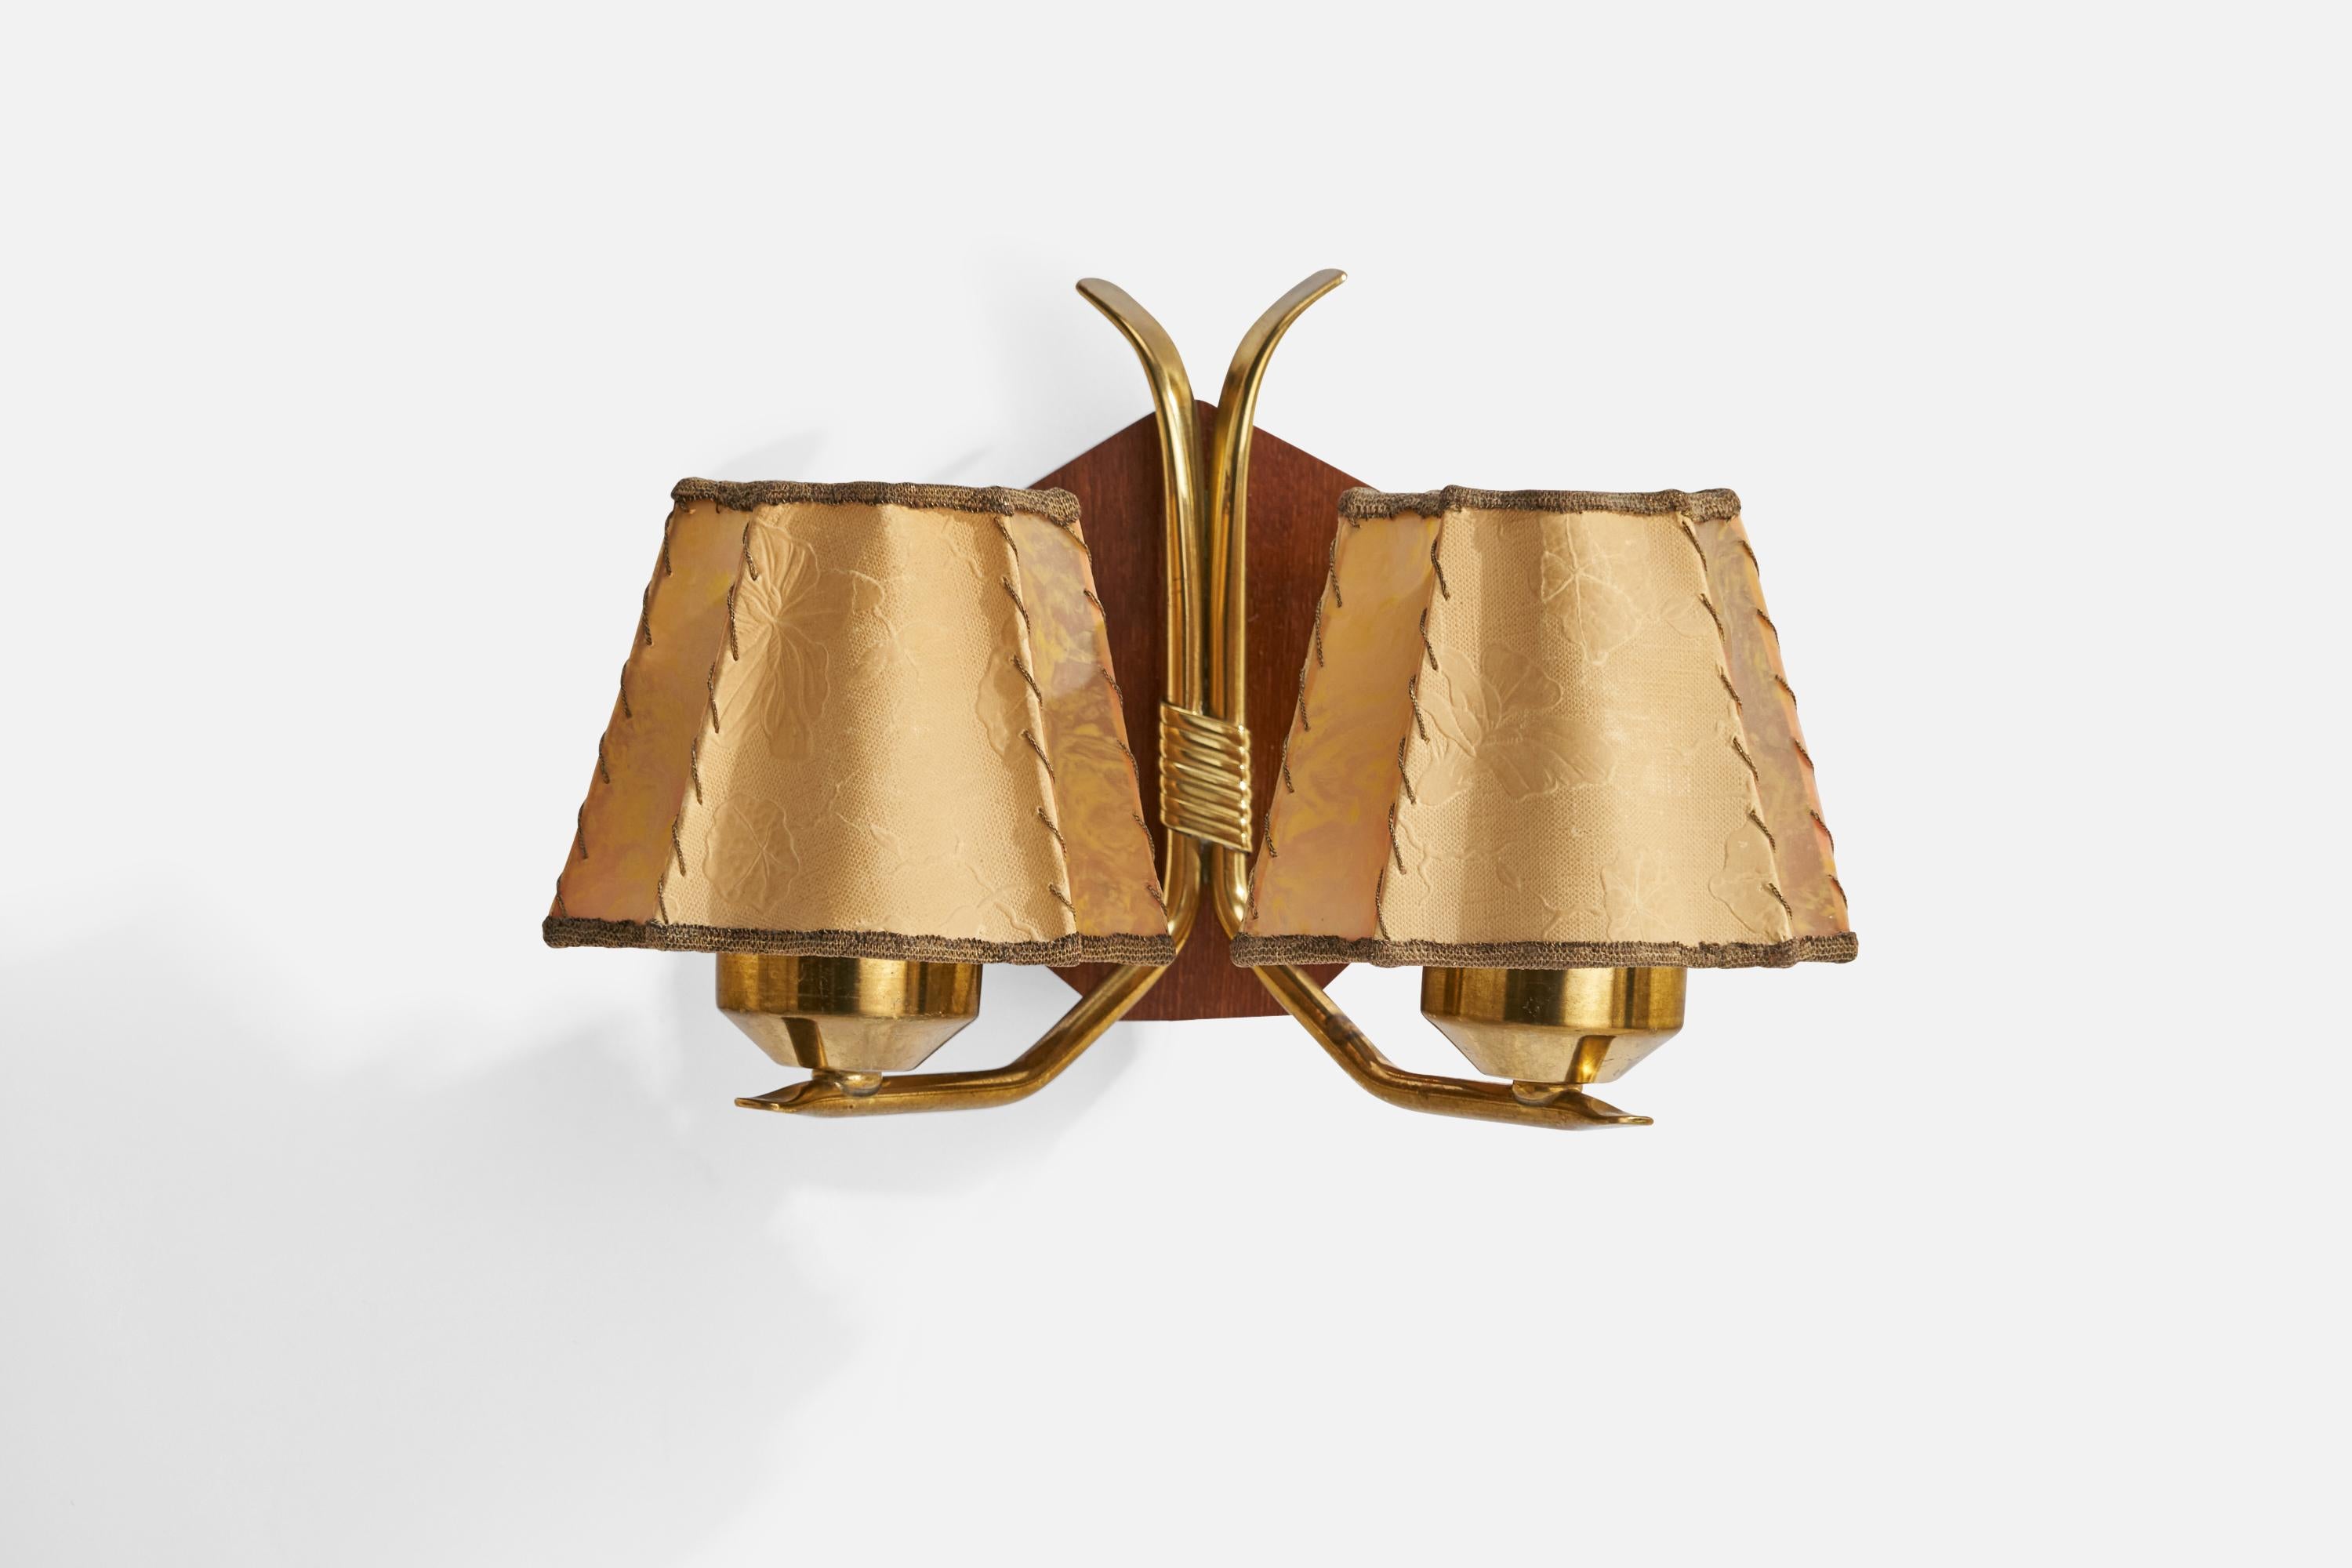 A brass, teak and beige parchment paper wall light designed and produced in Sweden, c. 1950s.

Overall Dimensions (inches): 6” H x 9.25” W x 6.5” D
Back Plate Dimensions (inches): 2.5” H x 2.5” W x .75”  D
Bulb Specifications: E-14 Bulb
Number of